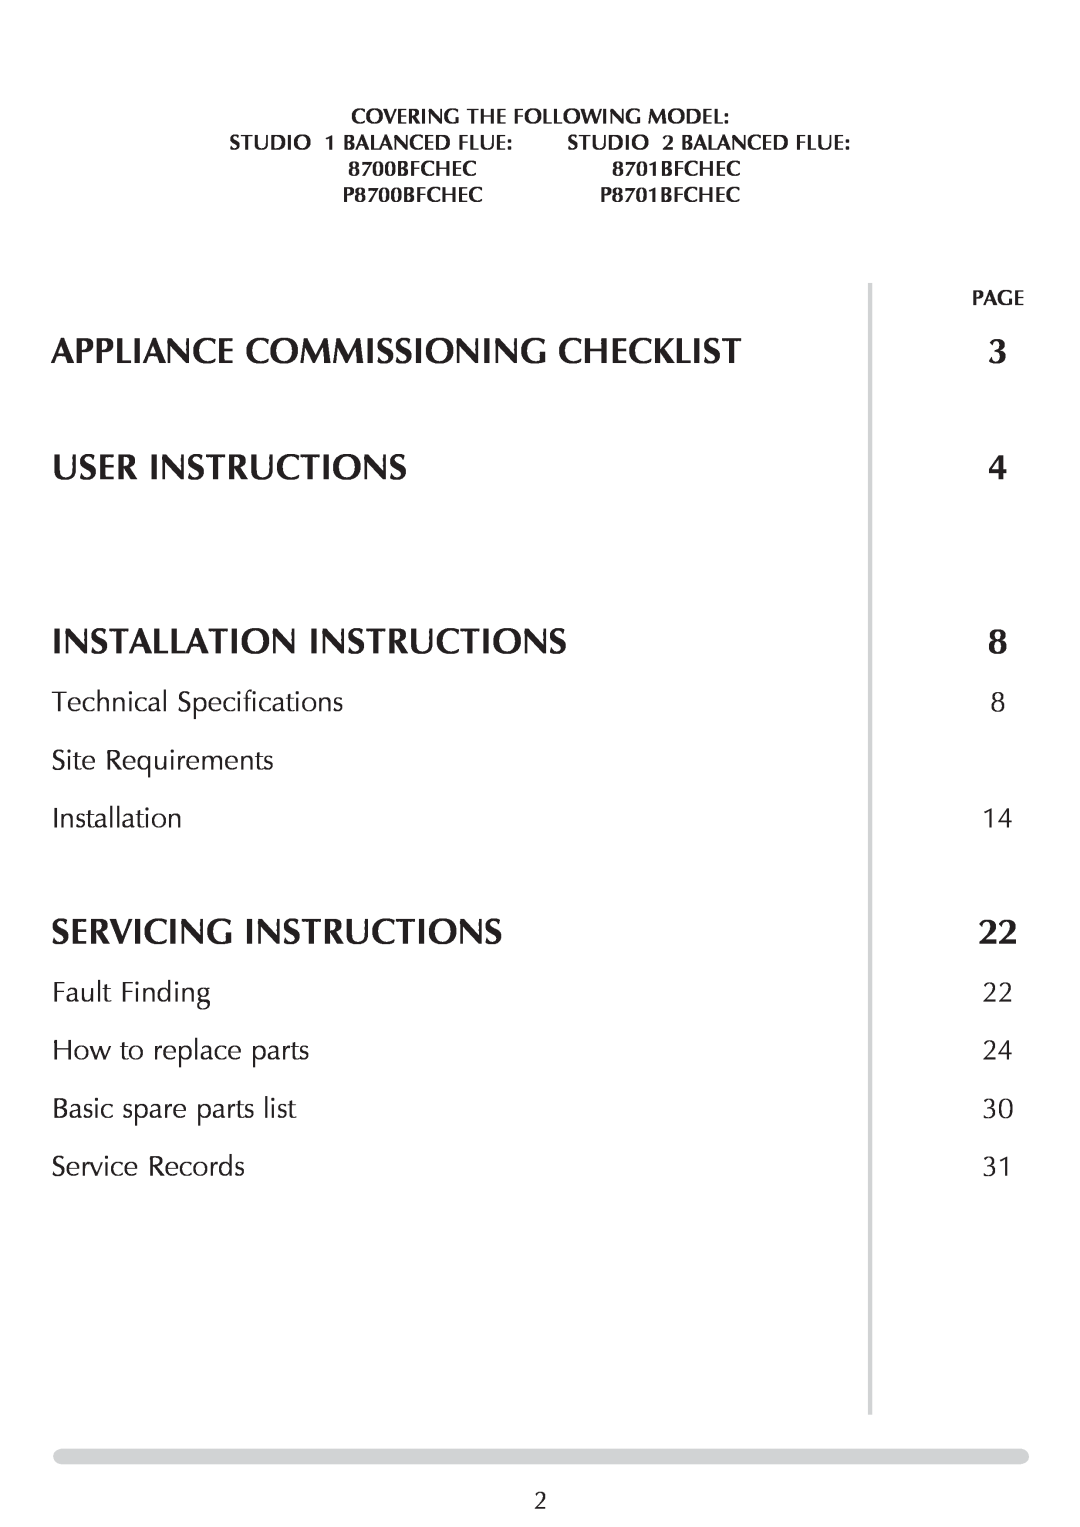 Stovax PR0919 instaLlation Instructions, Servicing Instructions, Covering The Following Model, Studio 1 Balanced flue 